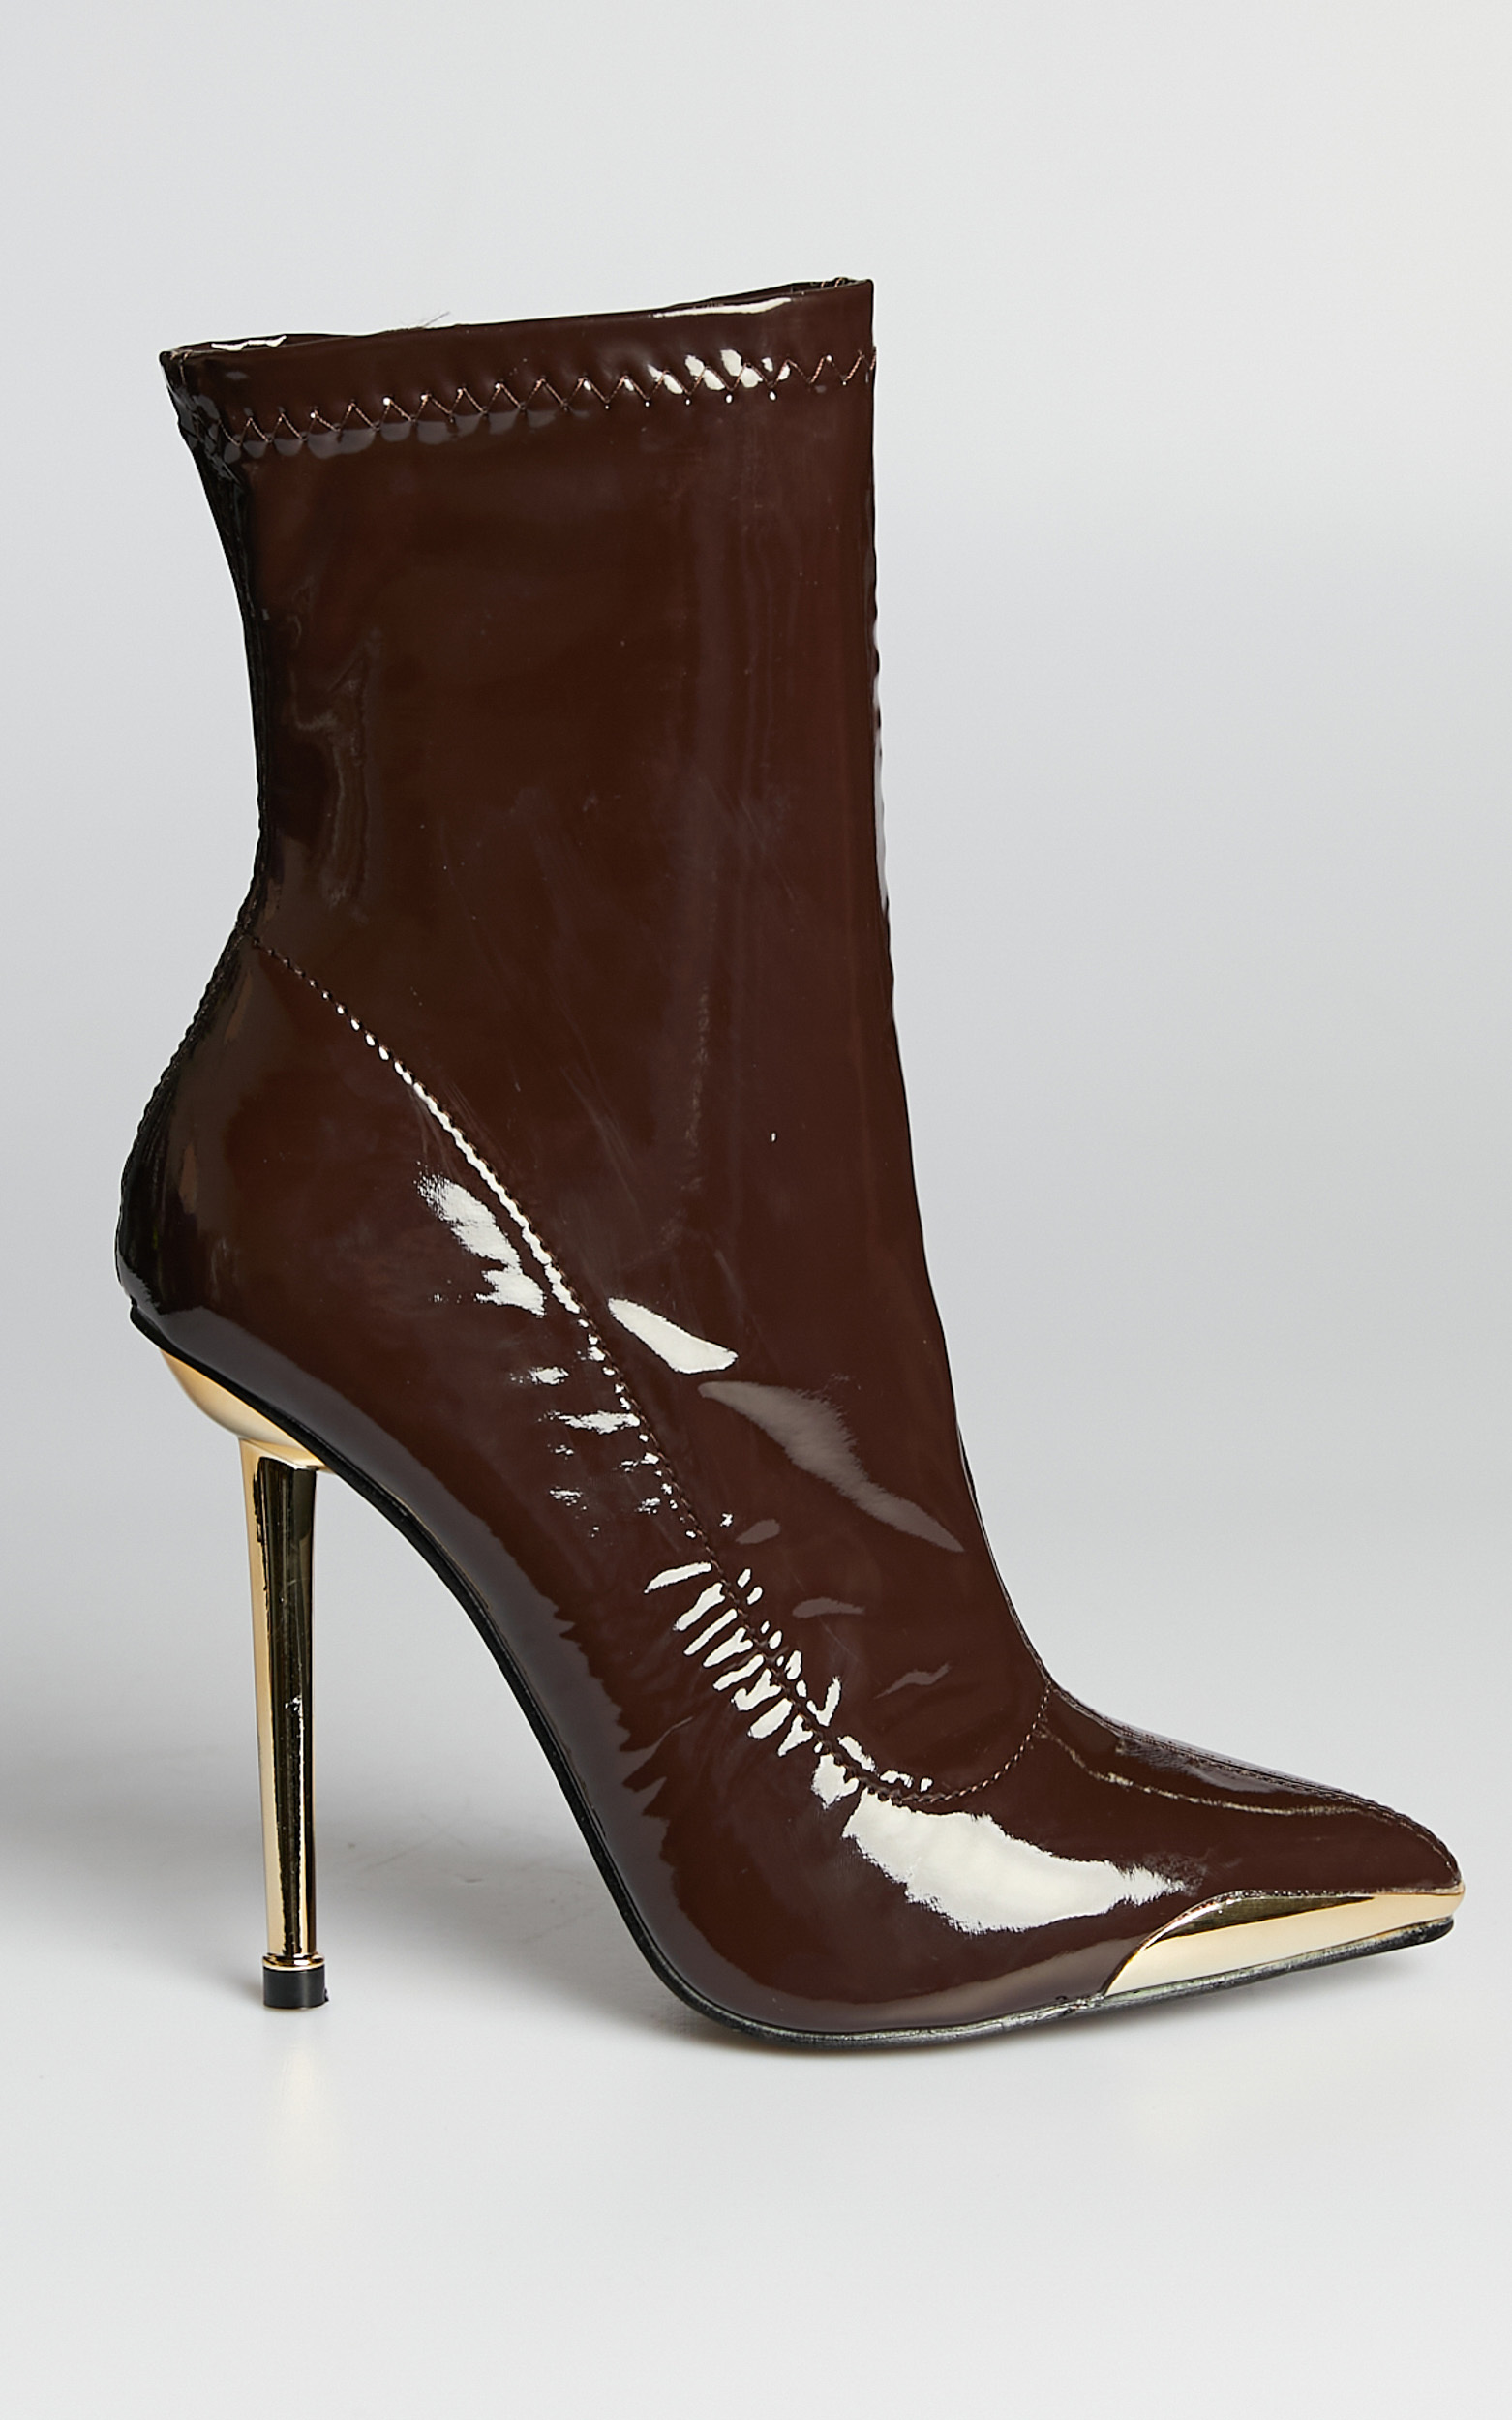 Public Desire - Player Boots in Chocolate Patent - 06, BRN1, hi-res image number null